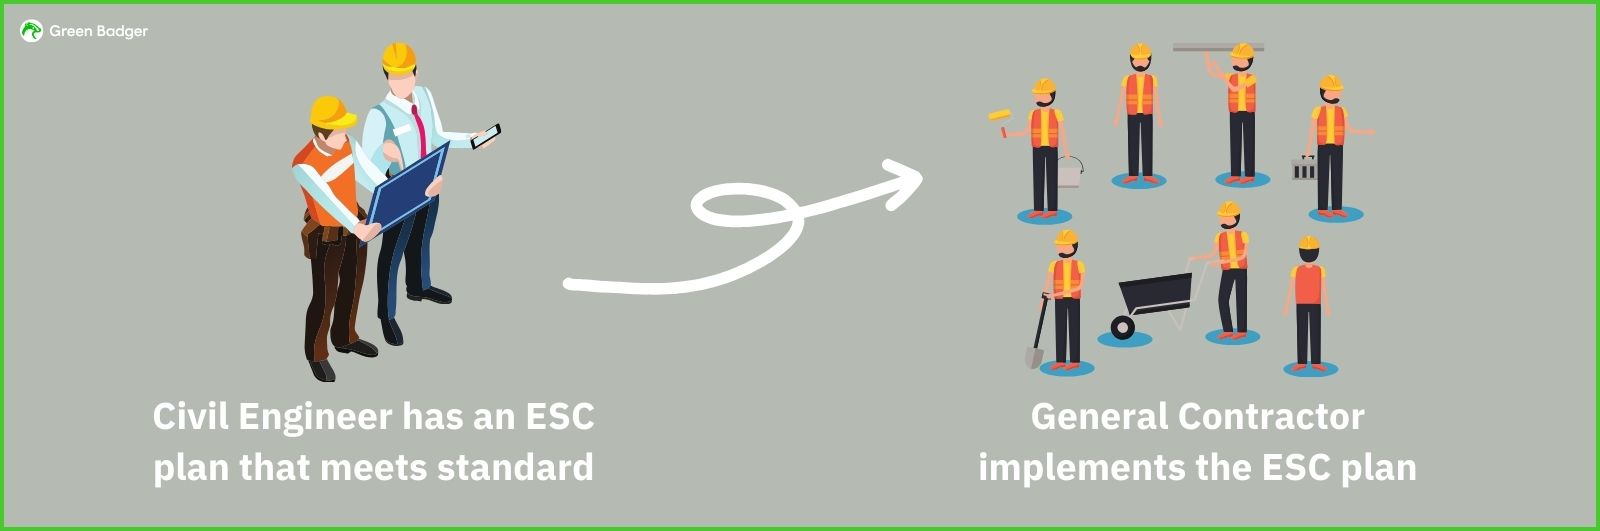 Green Badger's Ultimate Guide - Engineer to General Contractor ESC process